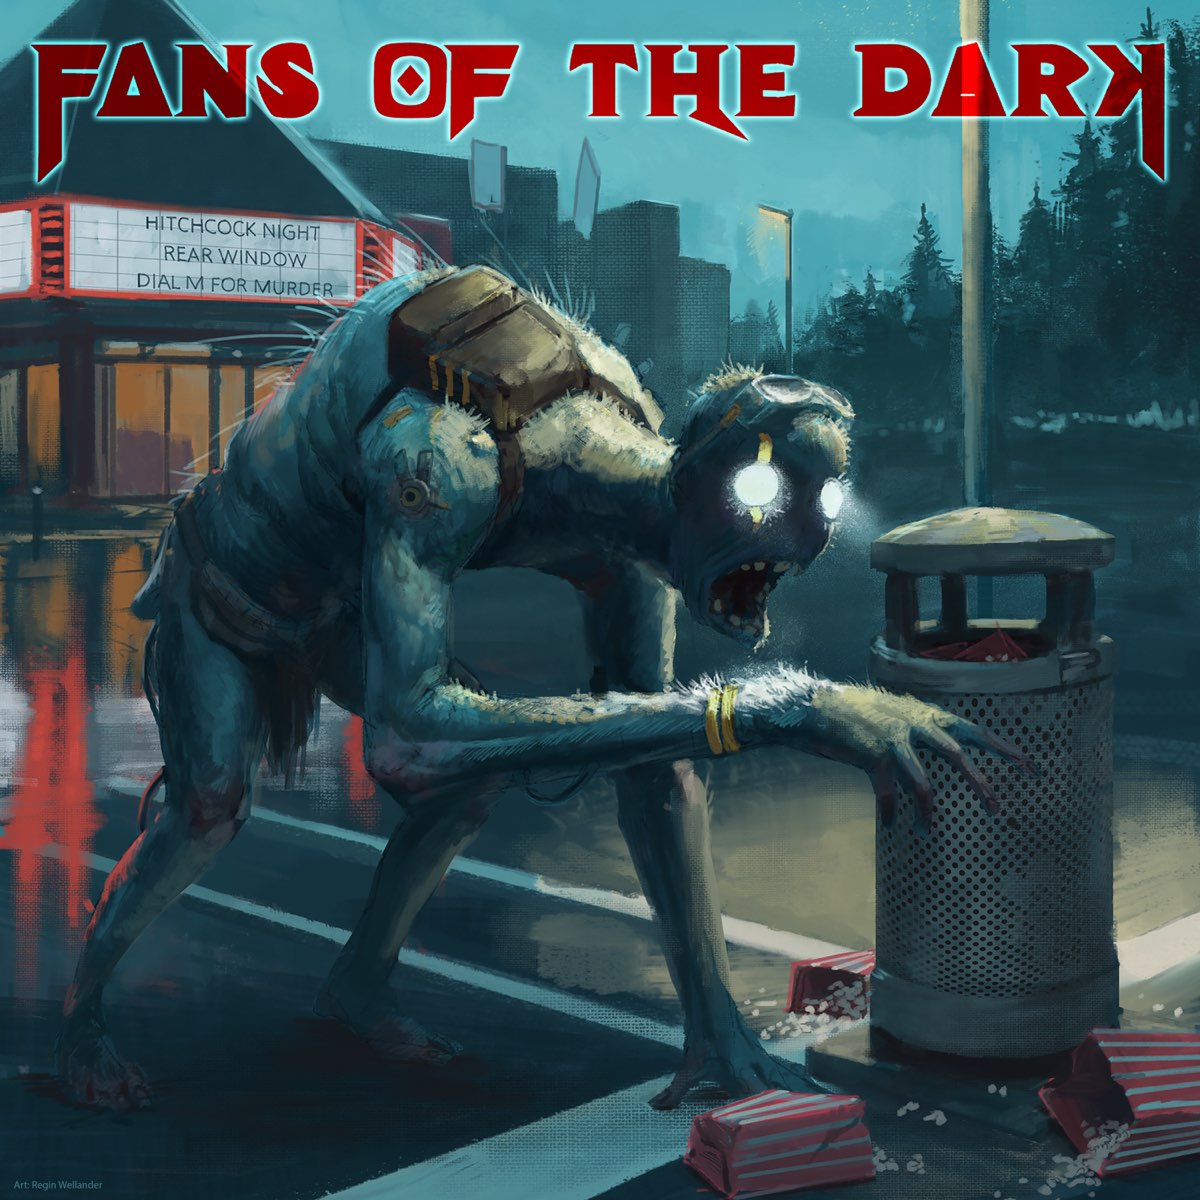 Killing my life. Fans of the Dark Fans of the Dark 2021. Дискография Fans of the Dark. Дискография Fans of the Dark (Suburbia 2022. Clive Nolan & Oliver Wakeman - Dark Fables (2021).